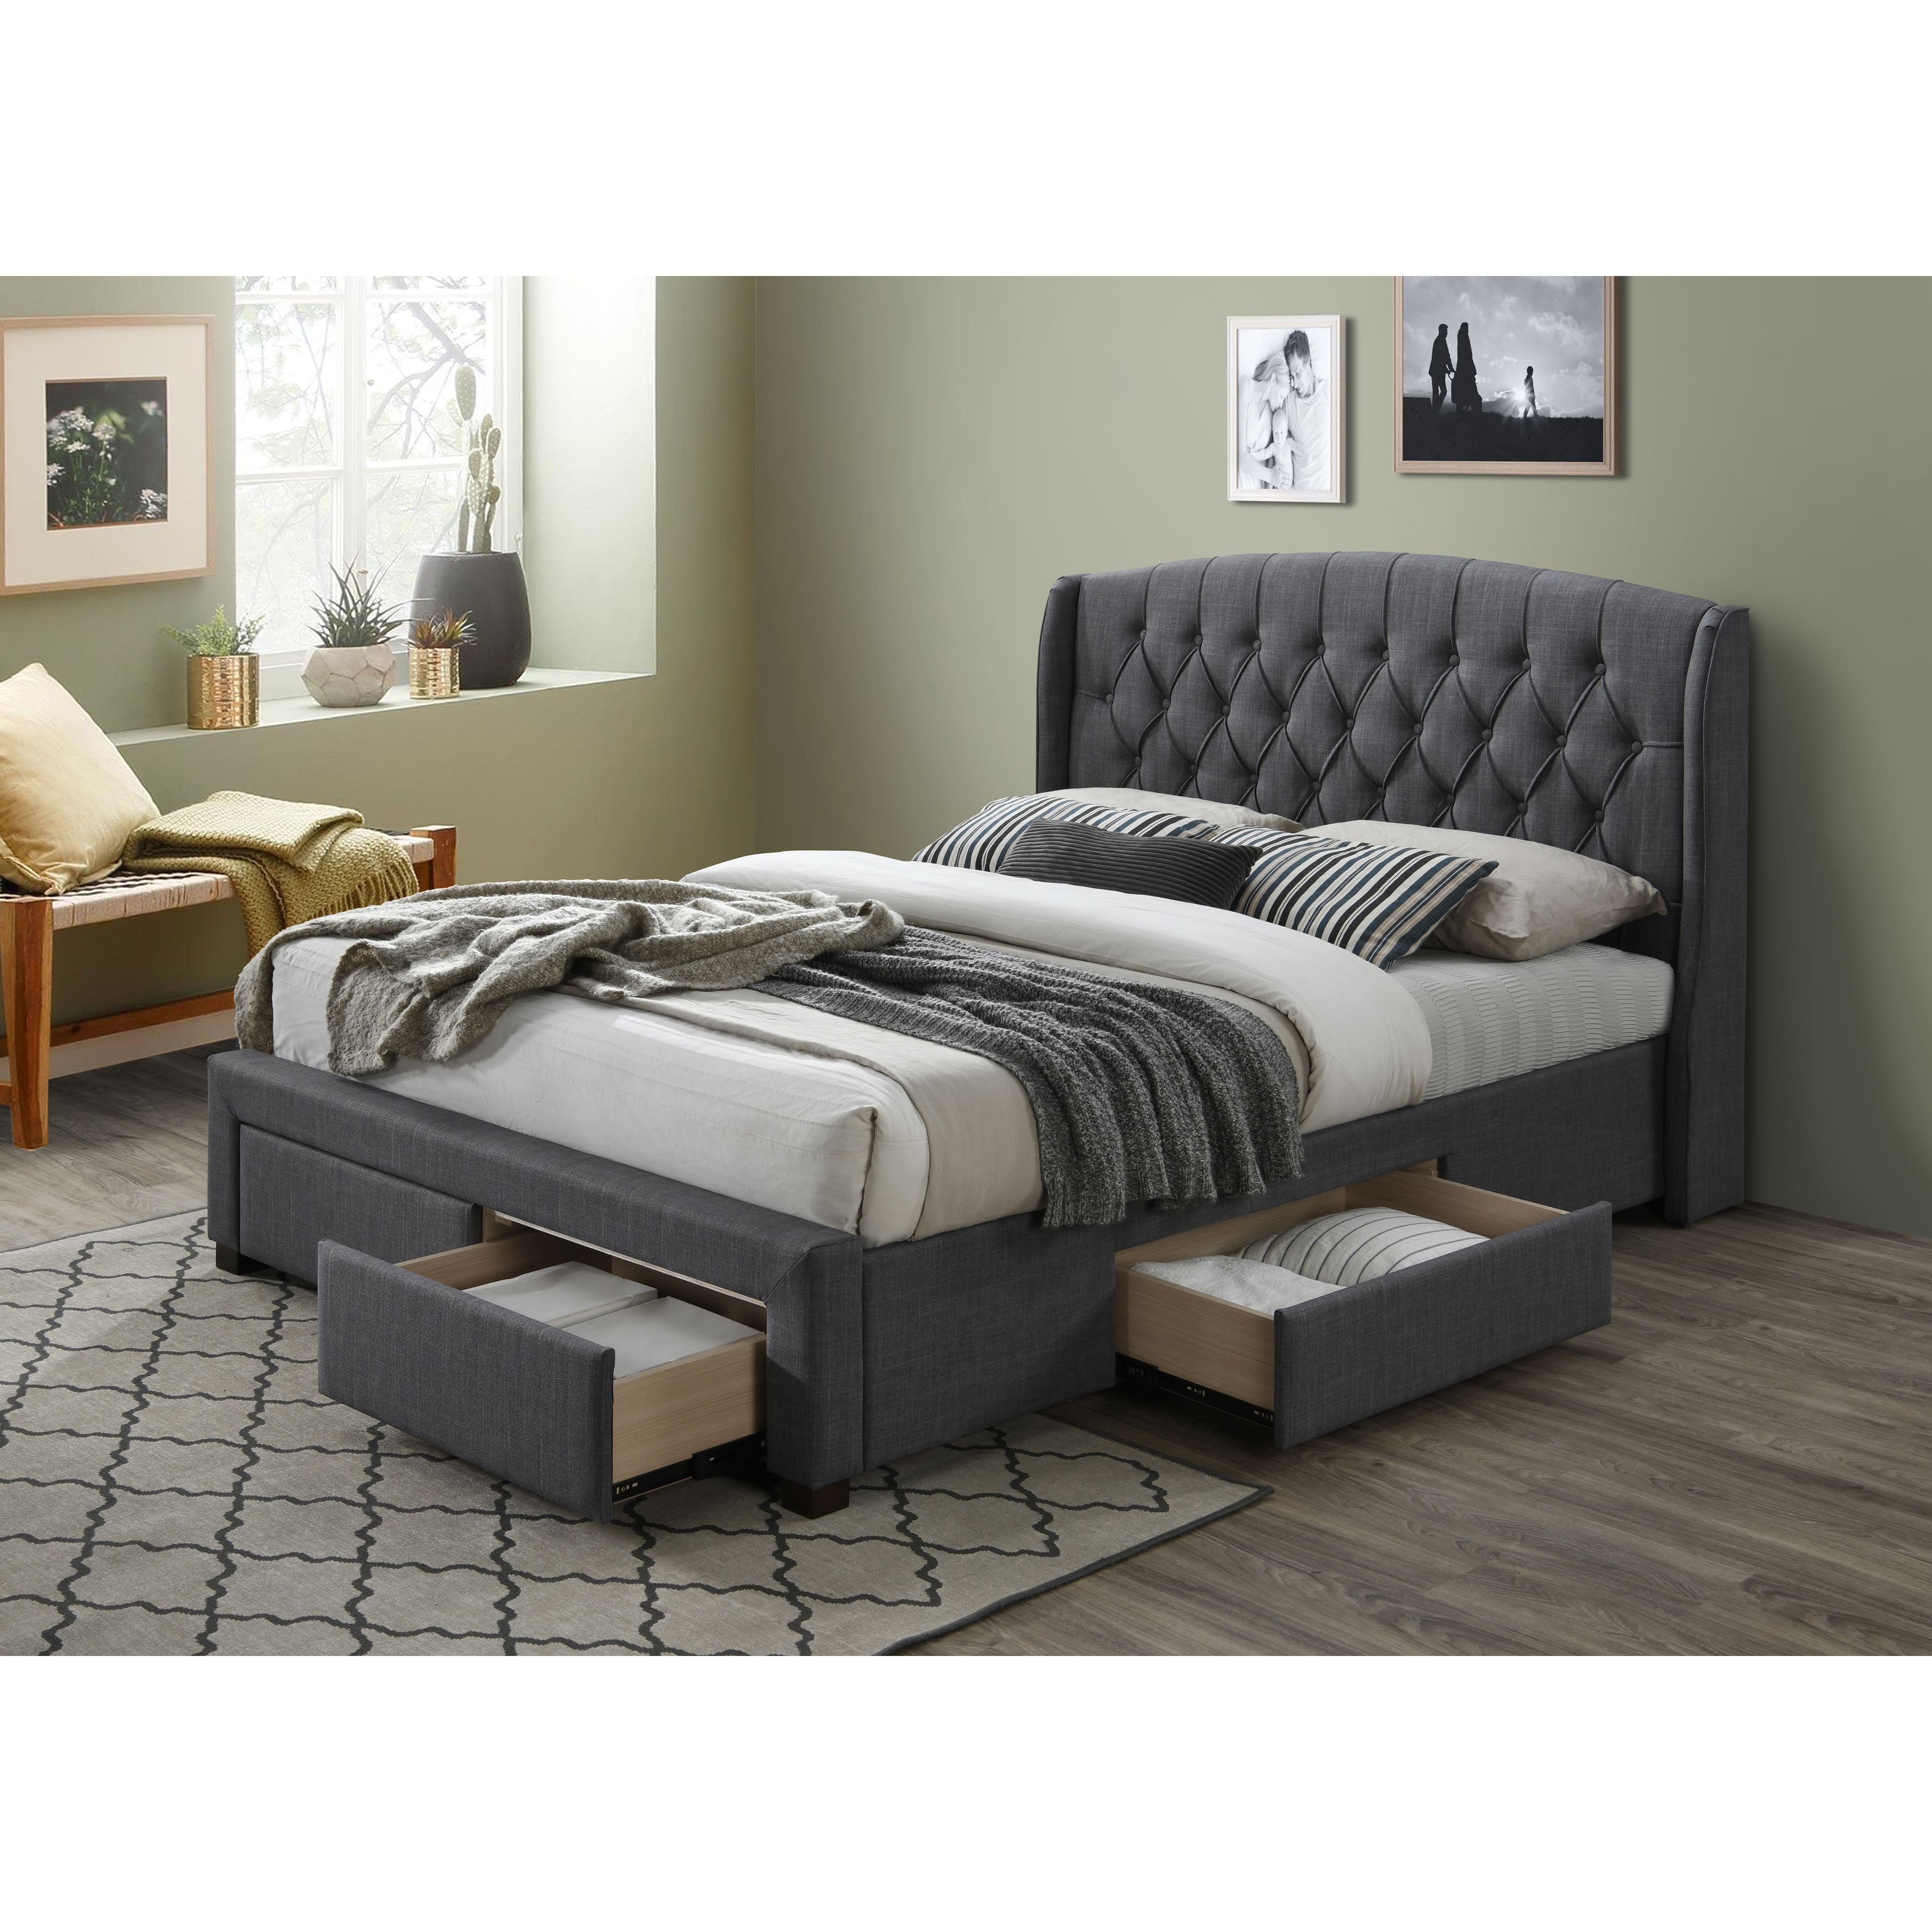 Out of Stock! King Size Bed Frame With Headboard and Storage Drawers Timber - Grey